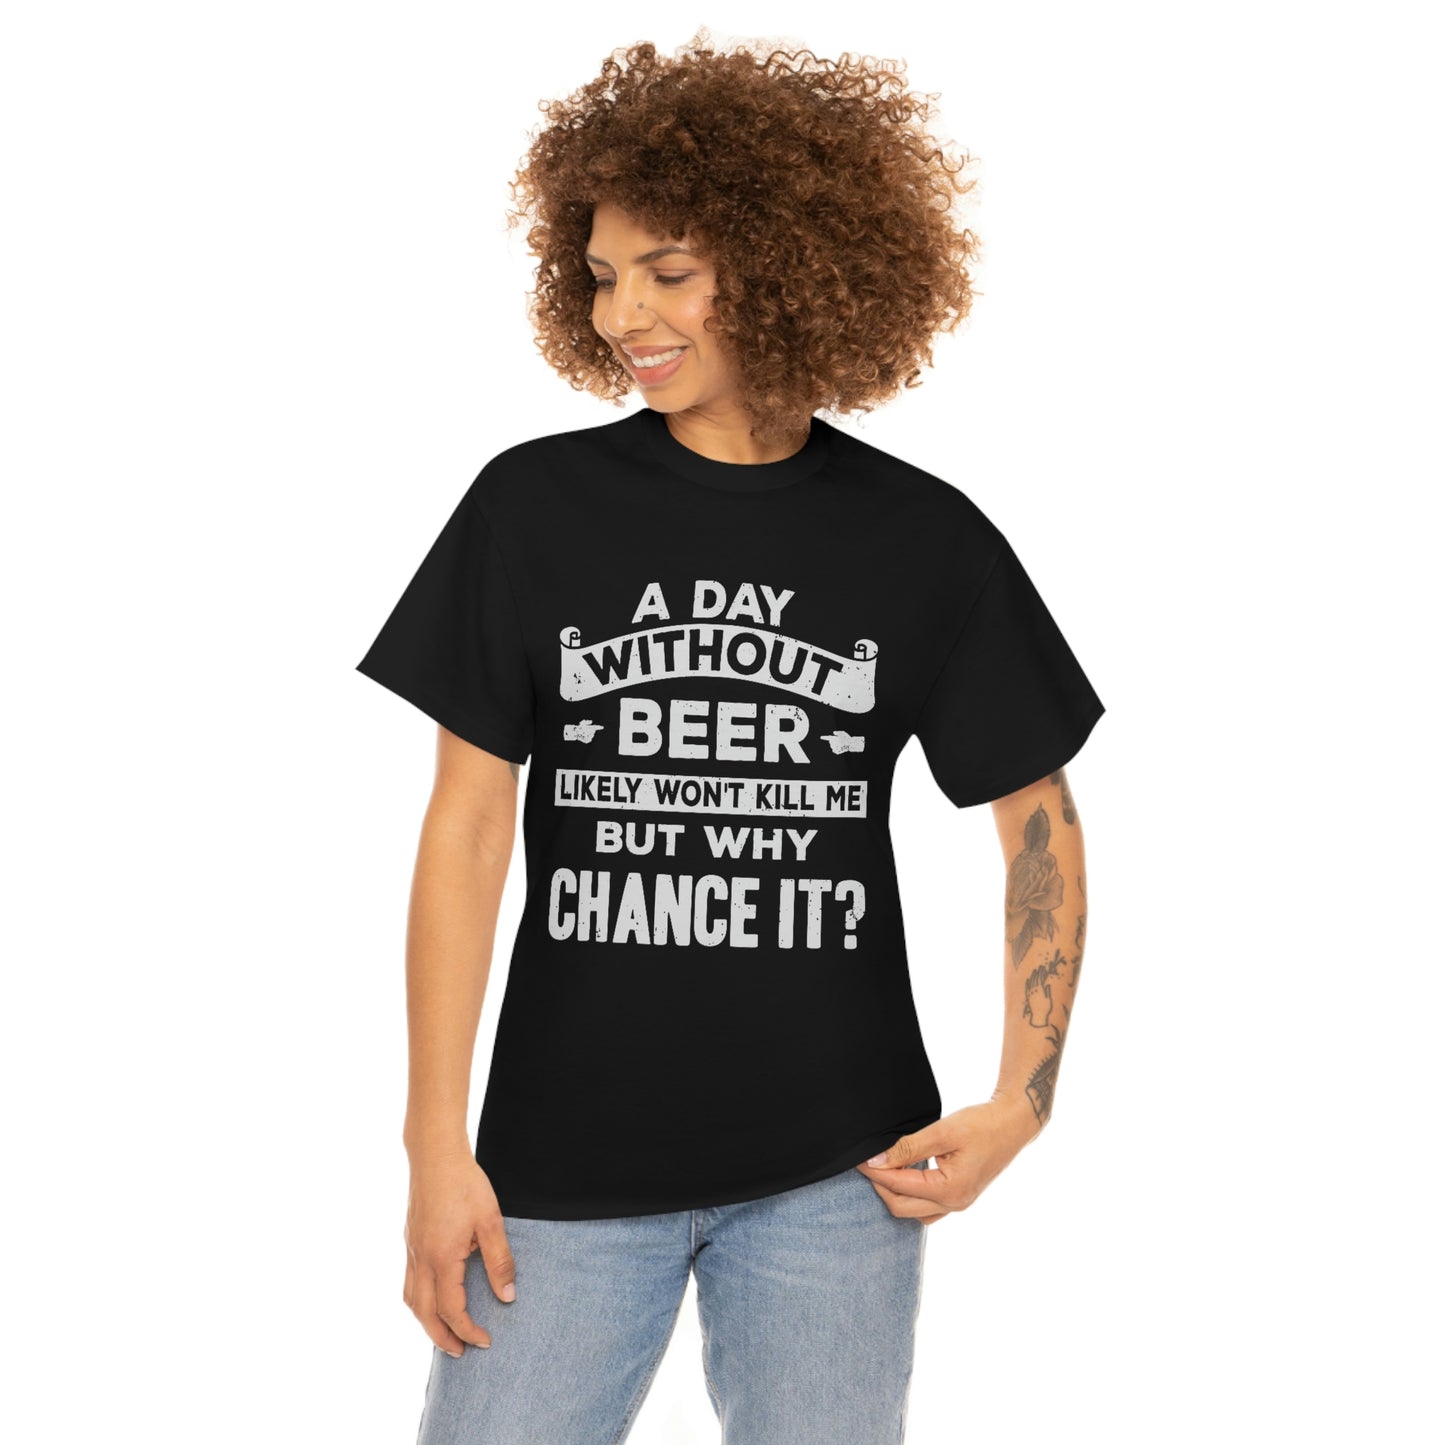 A Day Without Beer Likely Won't Kill Me But Why Chance It? Unisex Heavy Cotton Tee